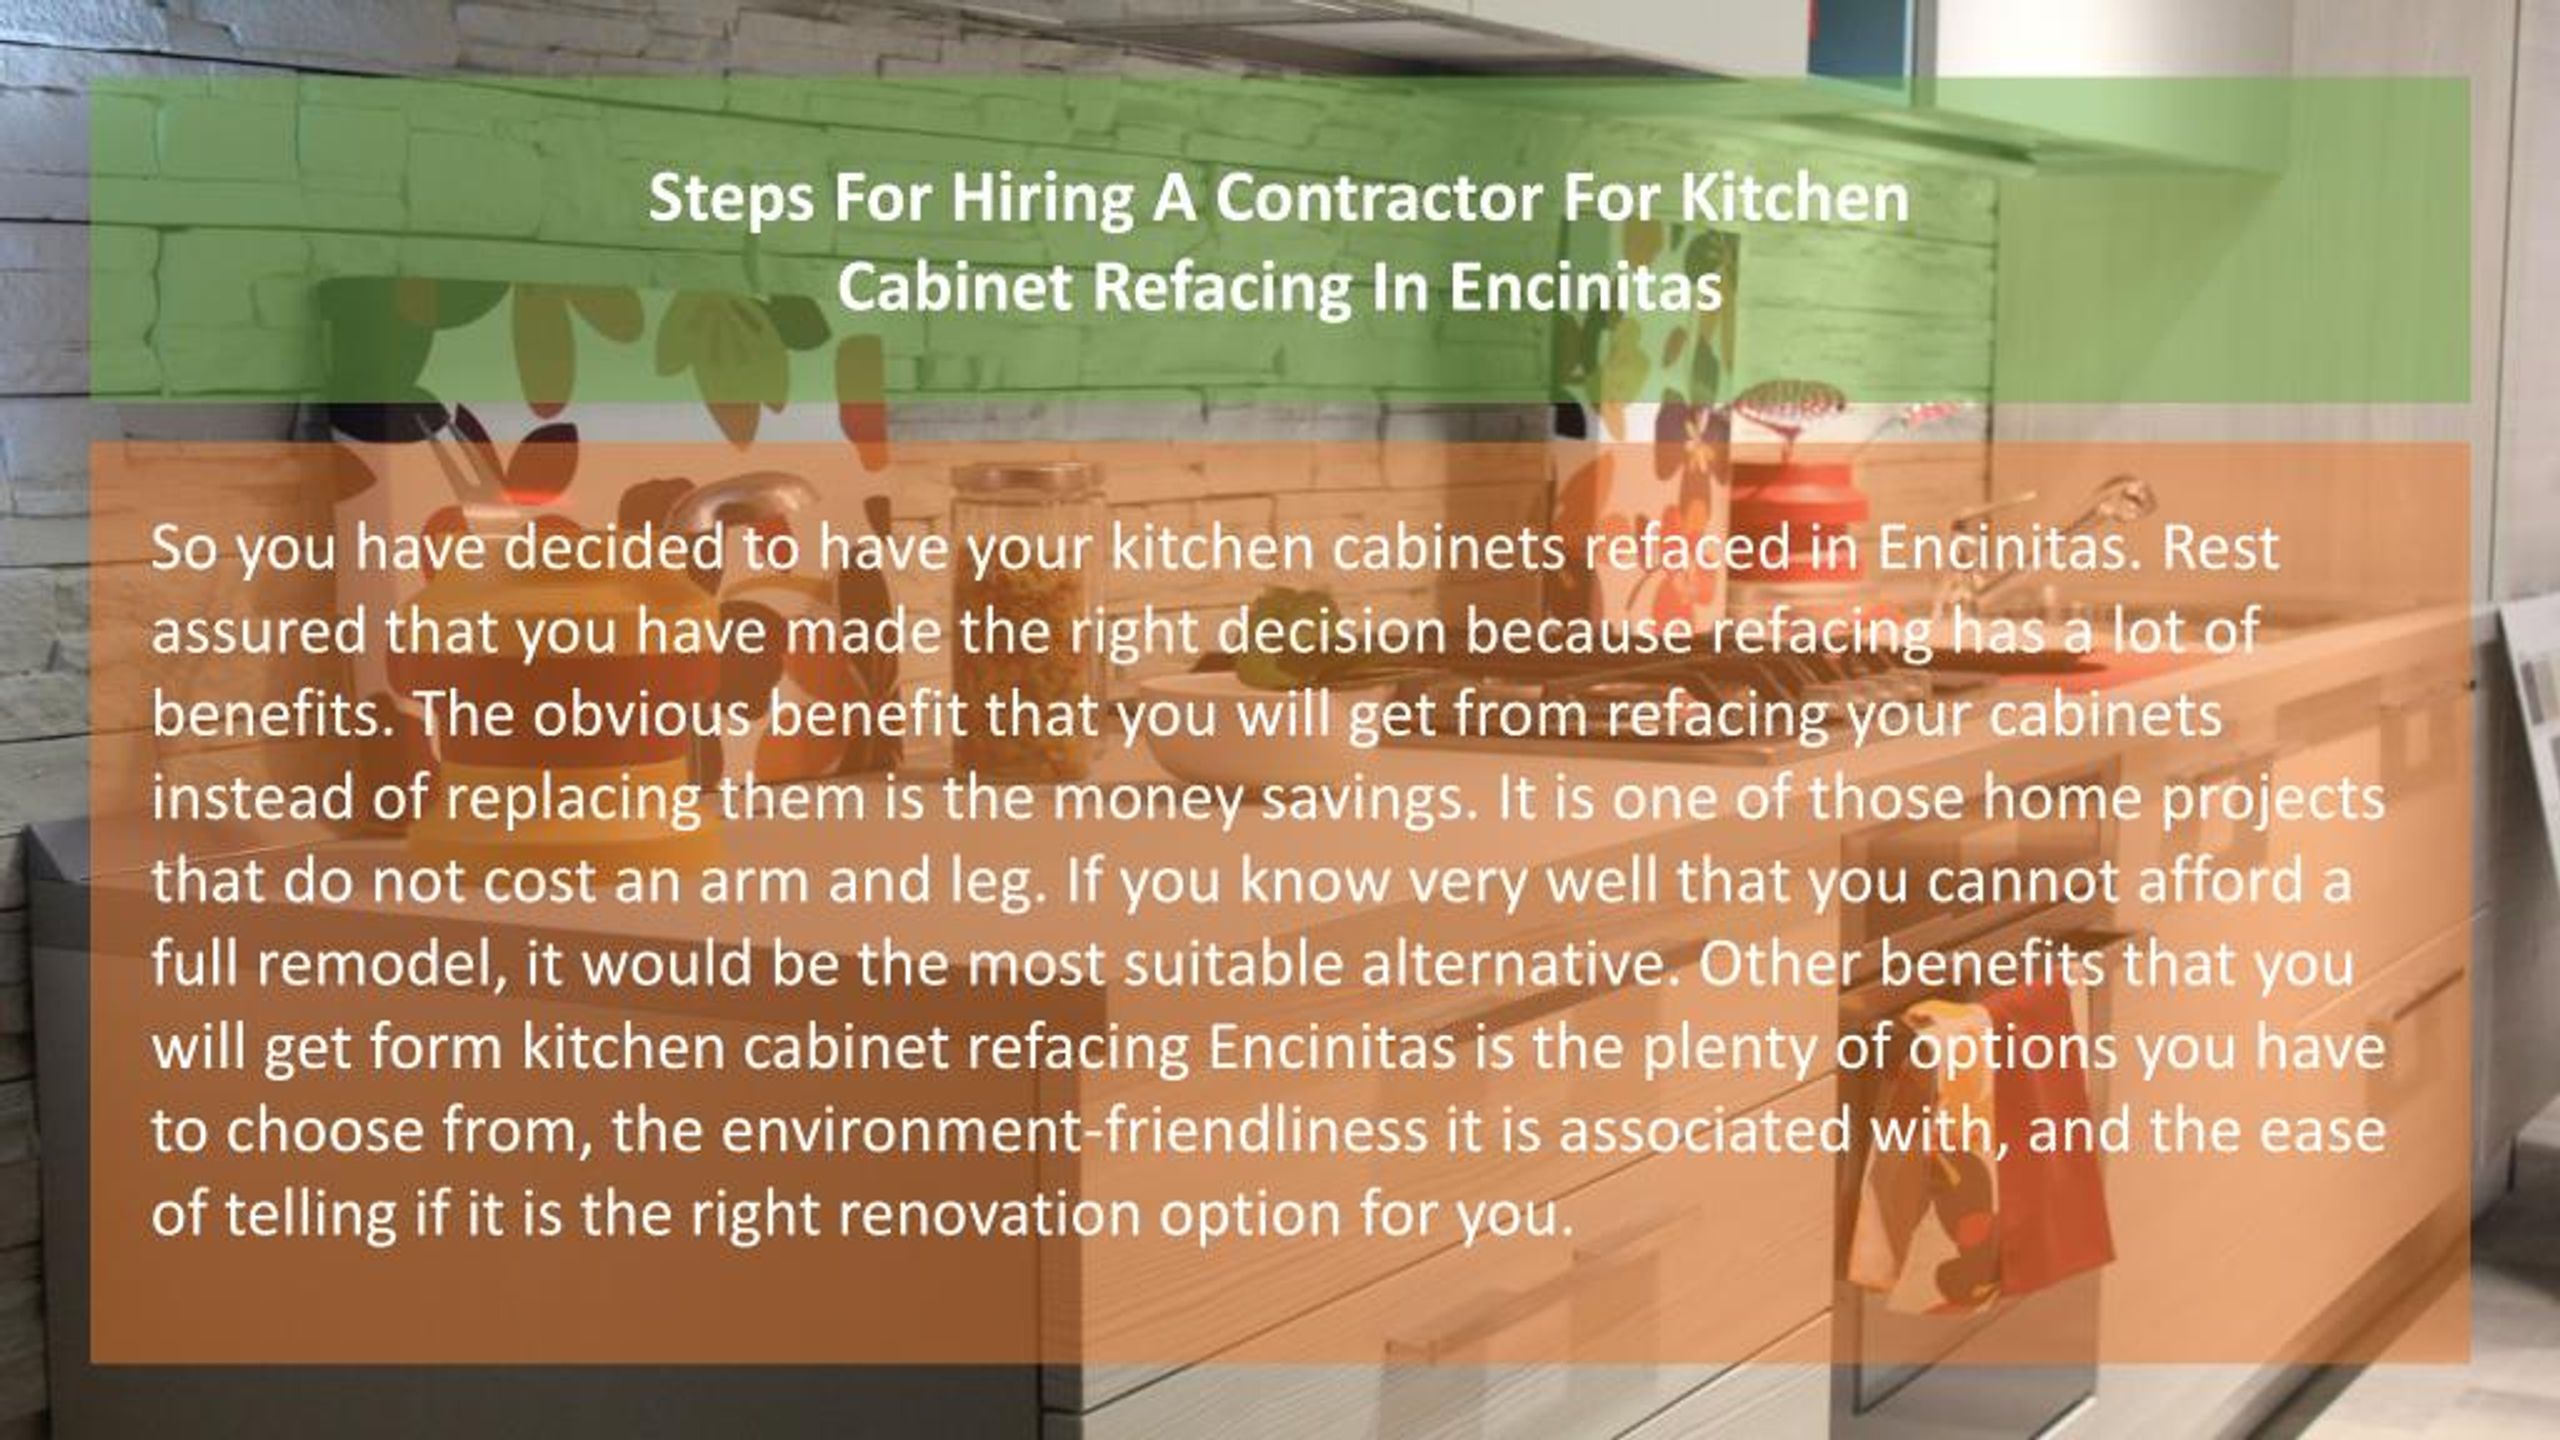 Ppt Steps For Hiring A Contractor For Kitchen Cabinet Refacing